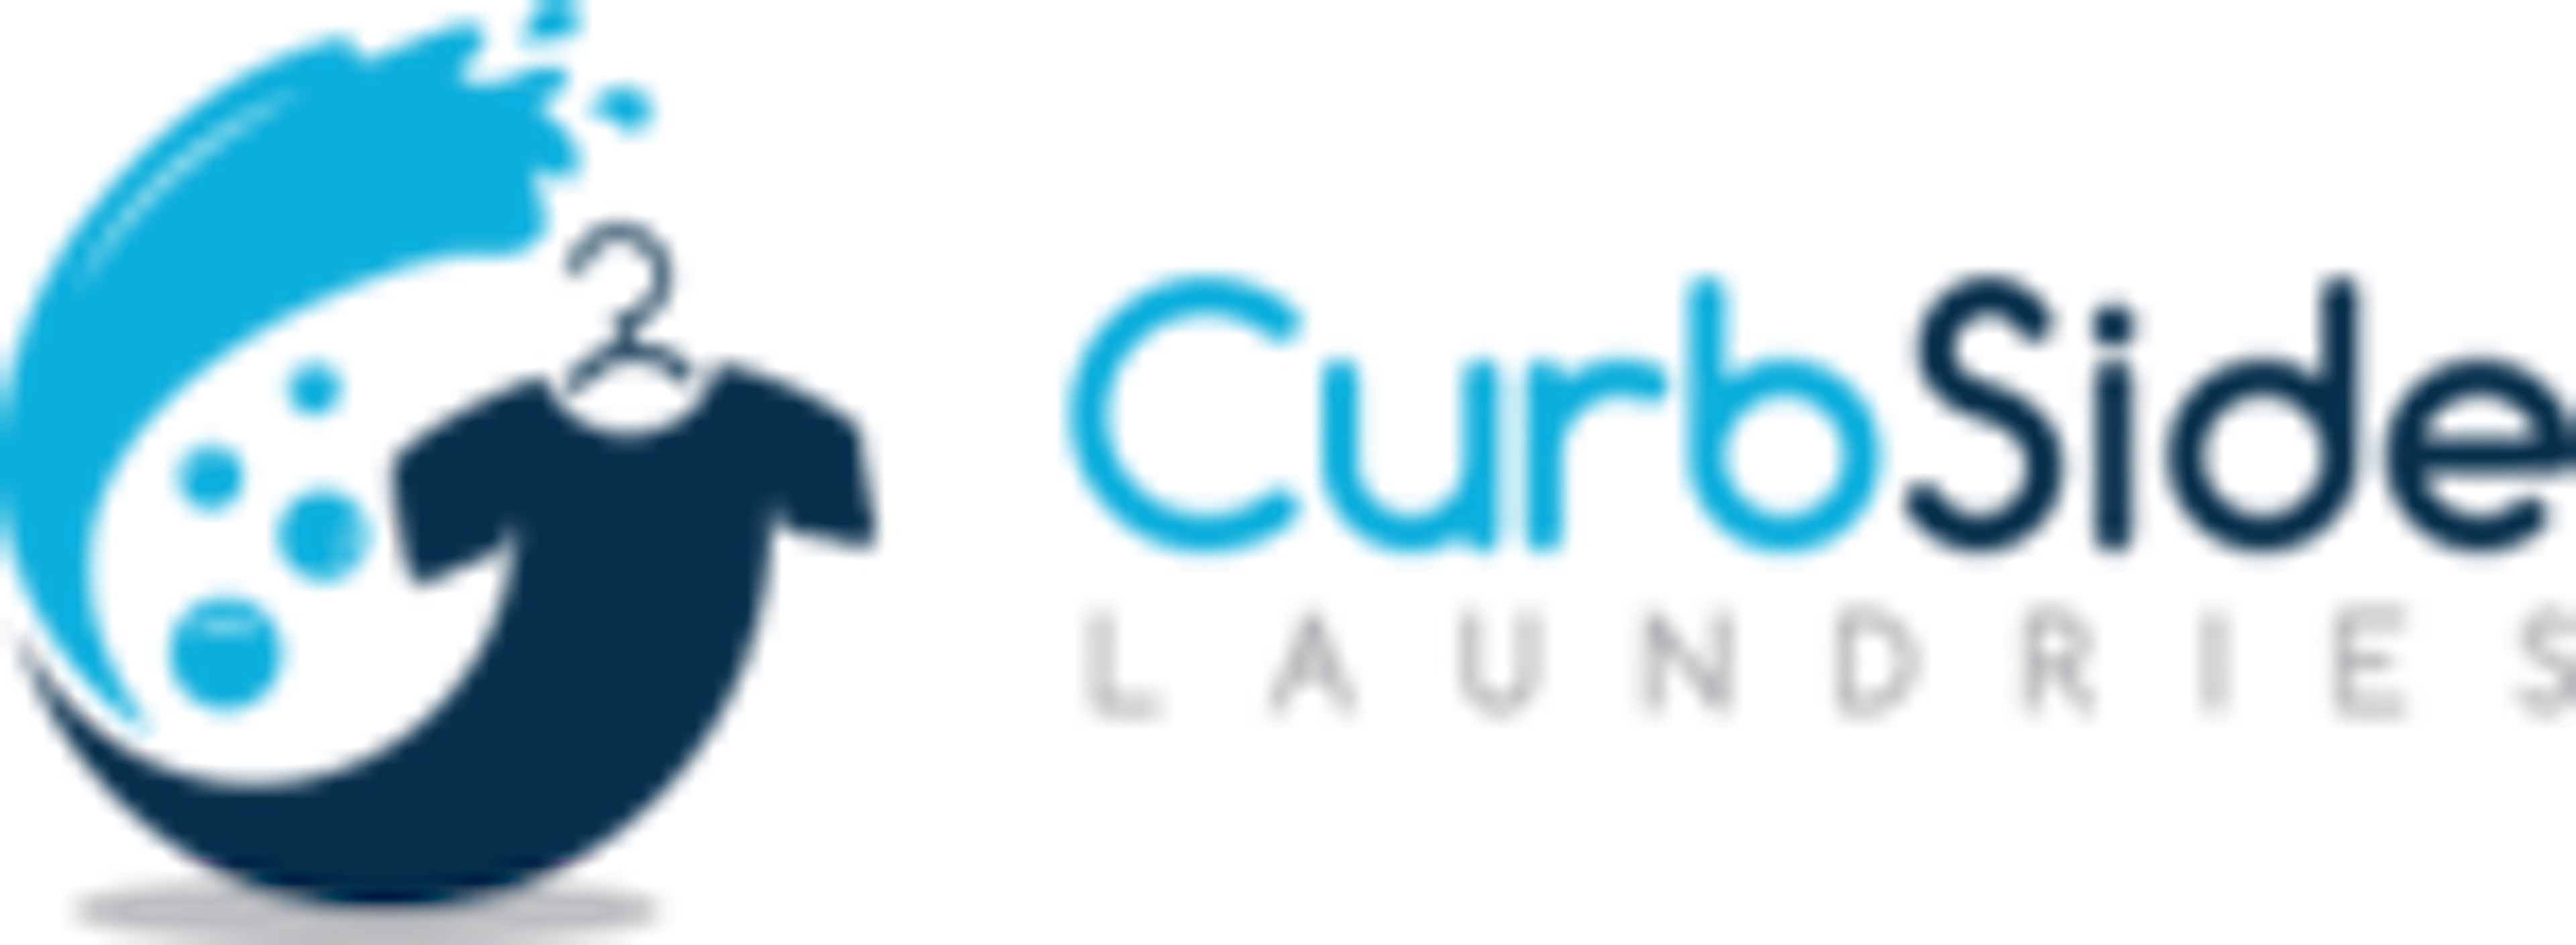 Curbside Laundries Logo